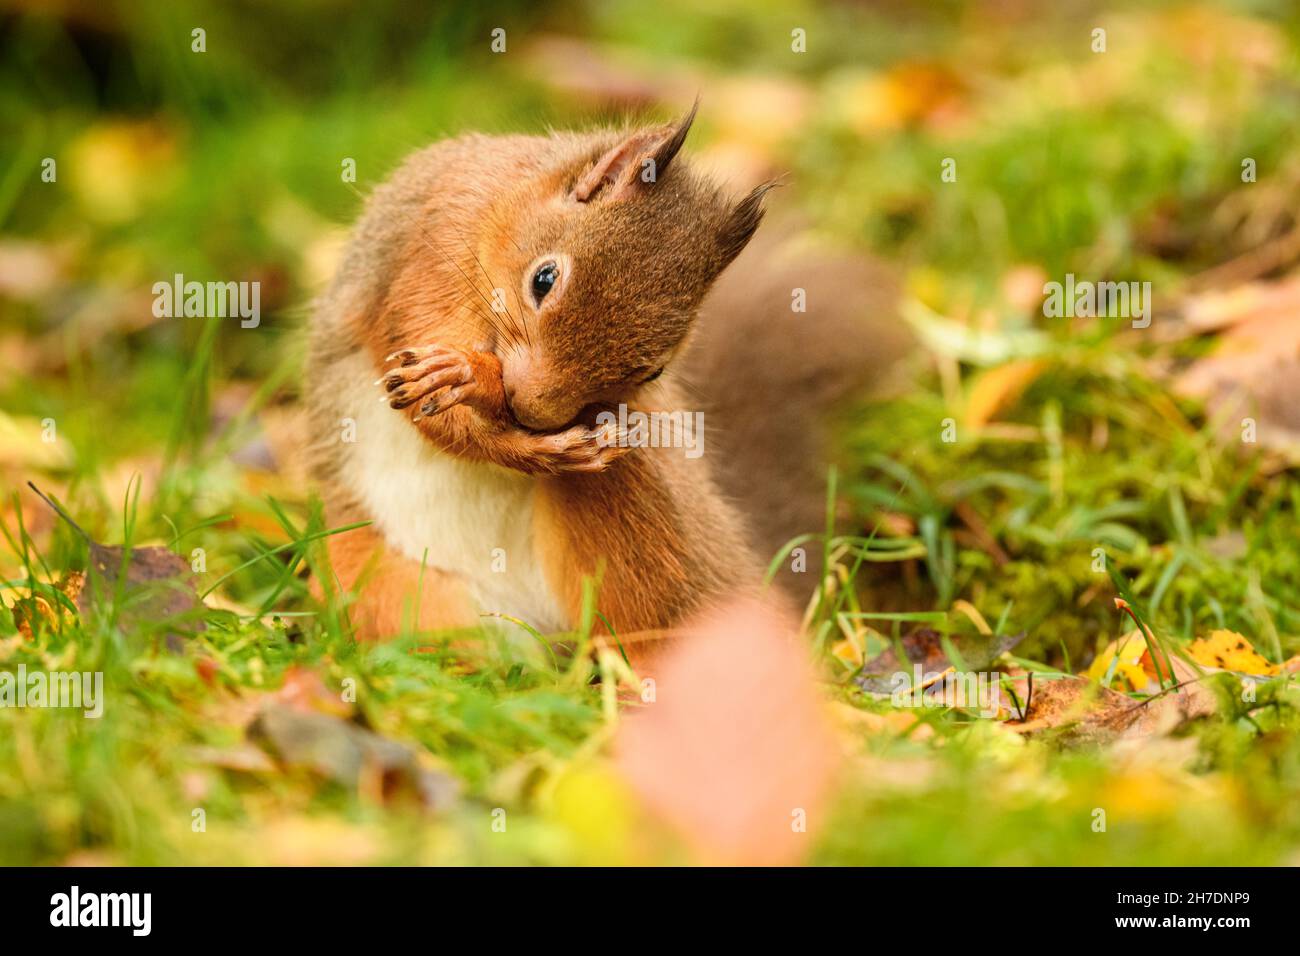 Red squirrel (Sciurus vulgaris) sitting on woodland floor cleaning her paws Stock Photo